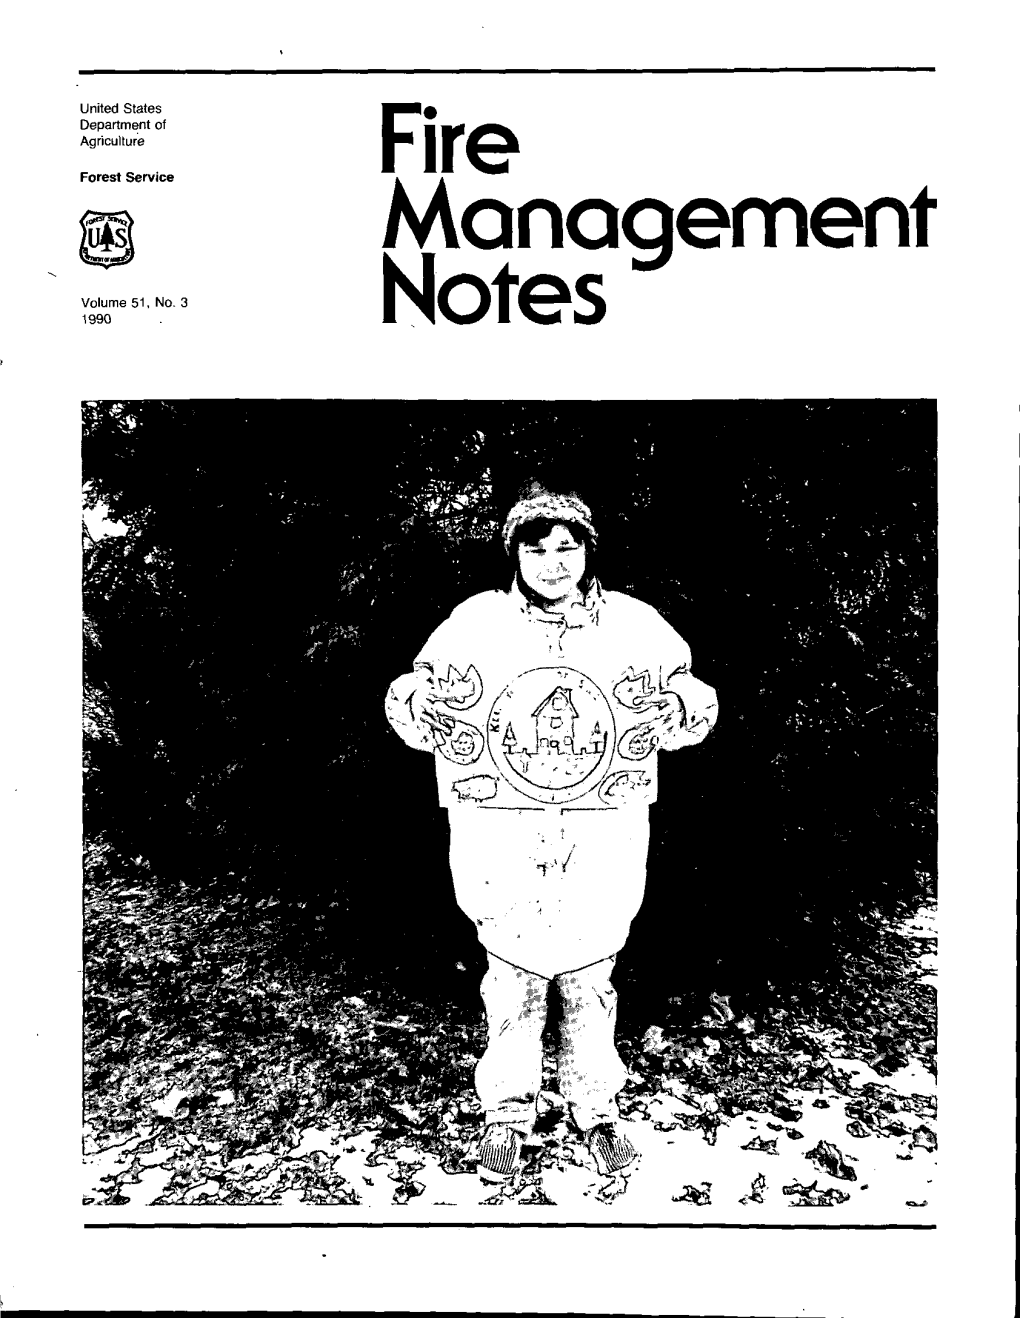 Fire Management Notes Is Published by the Forest Service of the United States Francis R